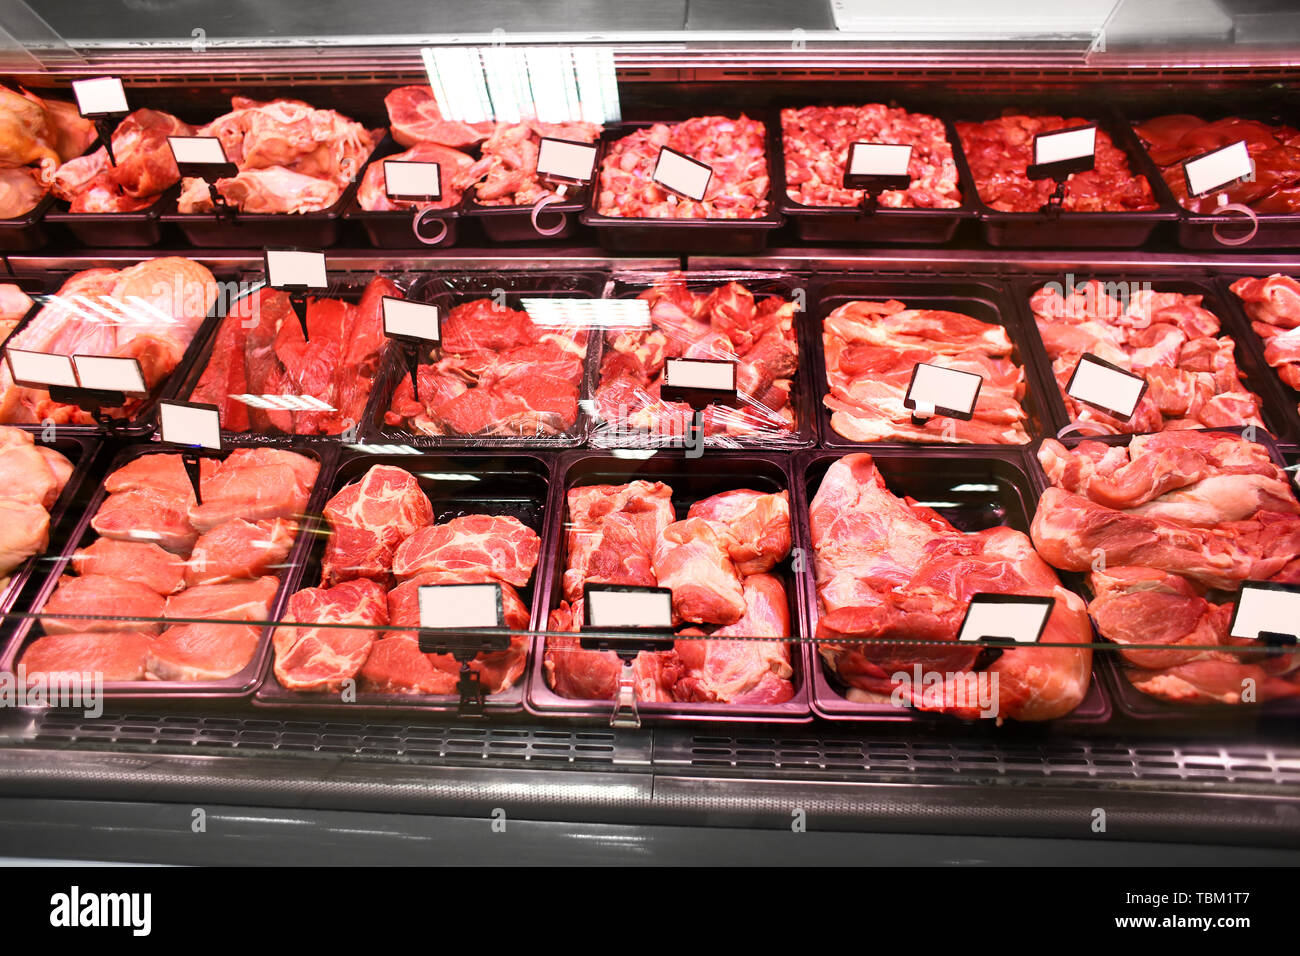 Refrigerated display case with fresh meat in supermarket Stock Photo - Alamy